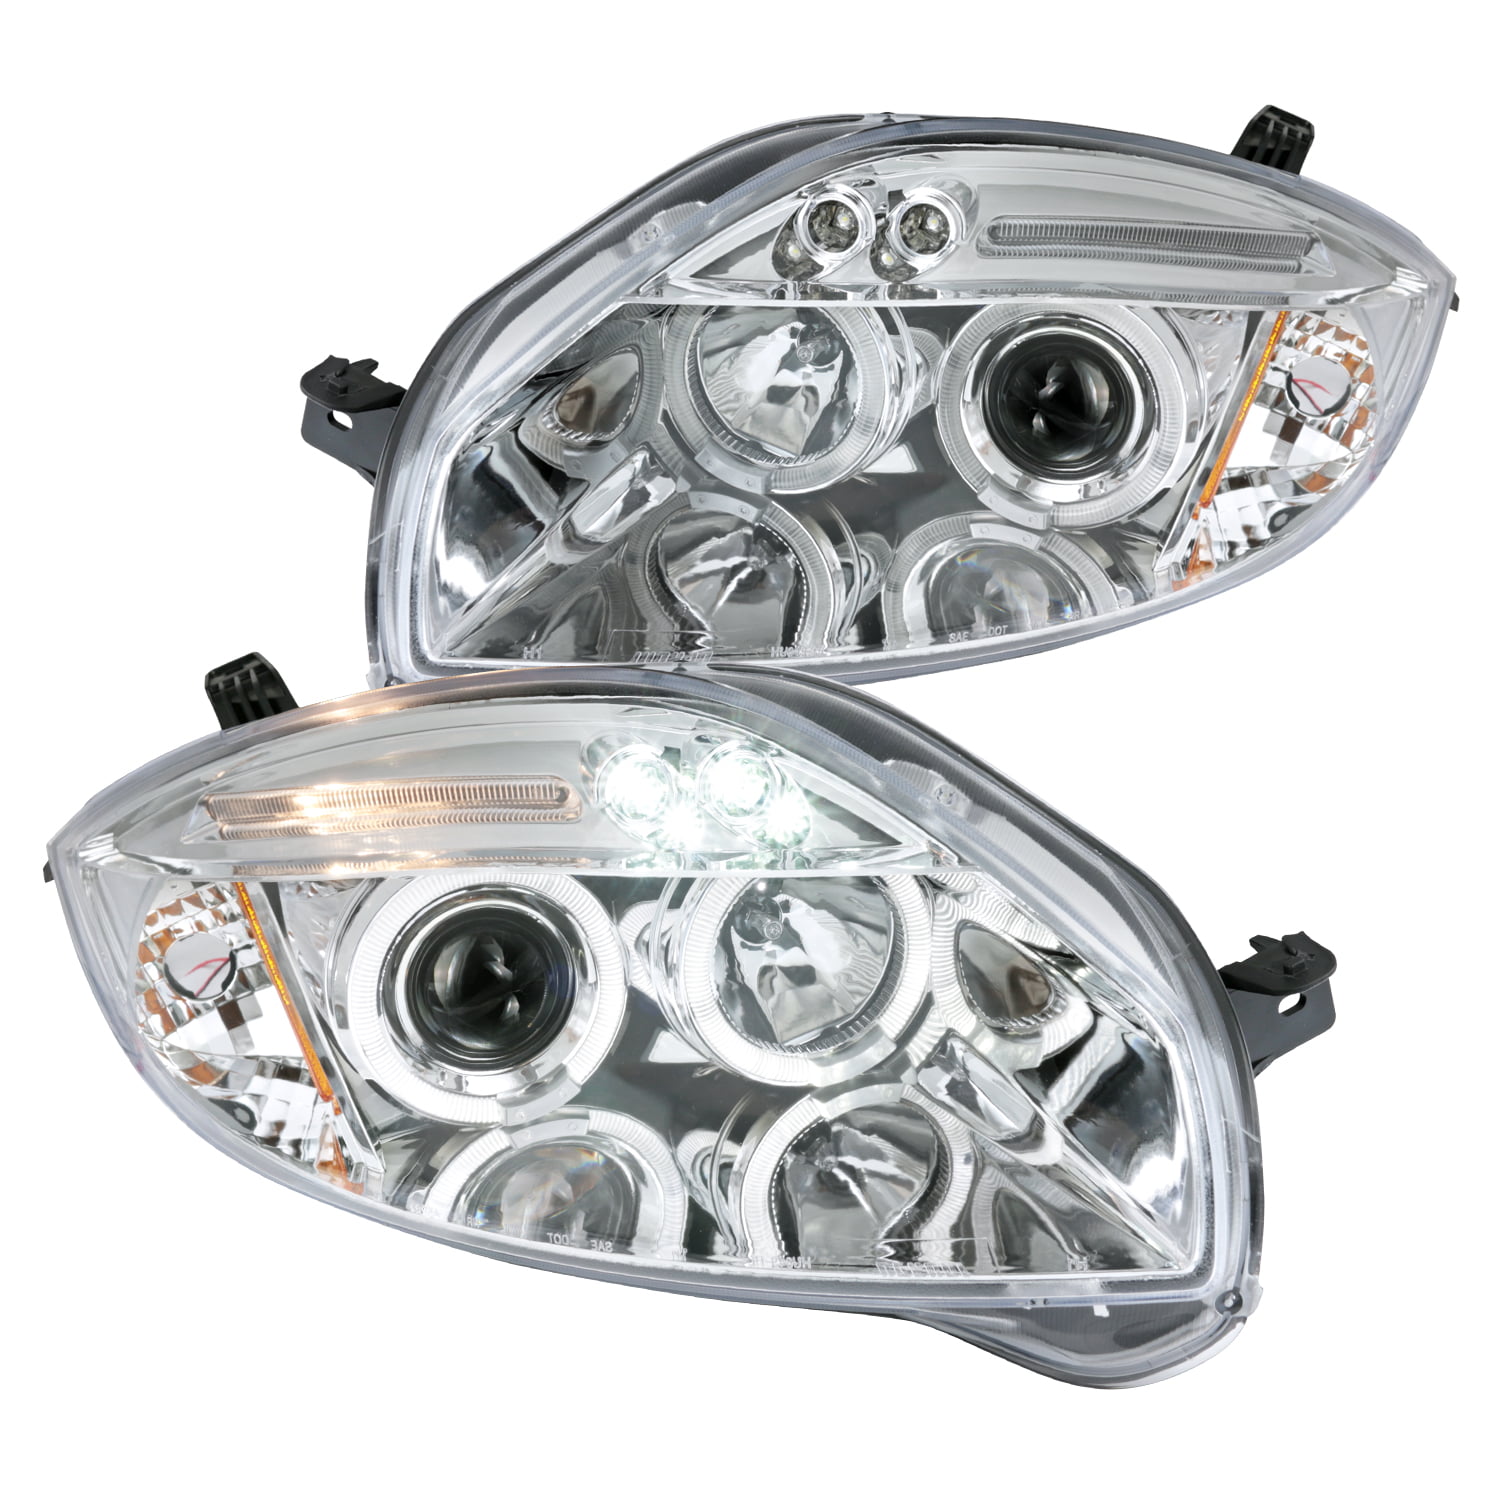 Halogen Headlight Lamp Assembly Pair LH & RH Sides for Mitsubishi Eclipse